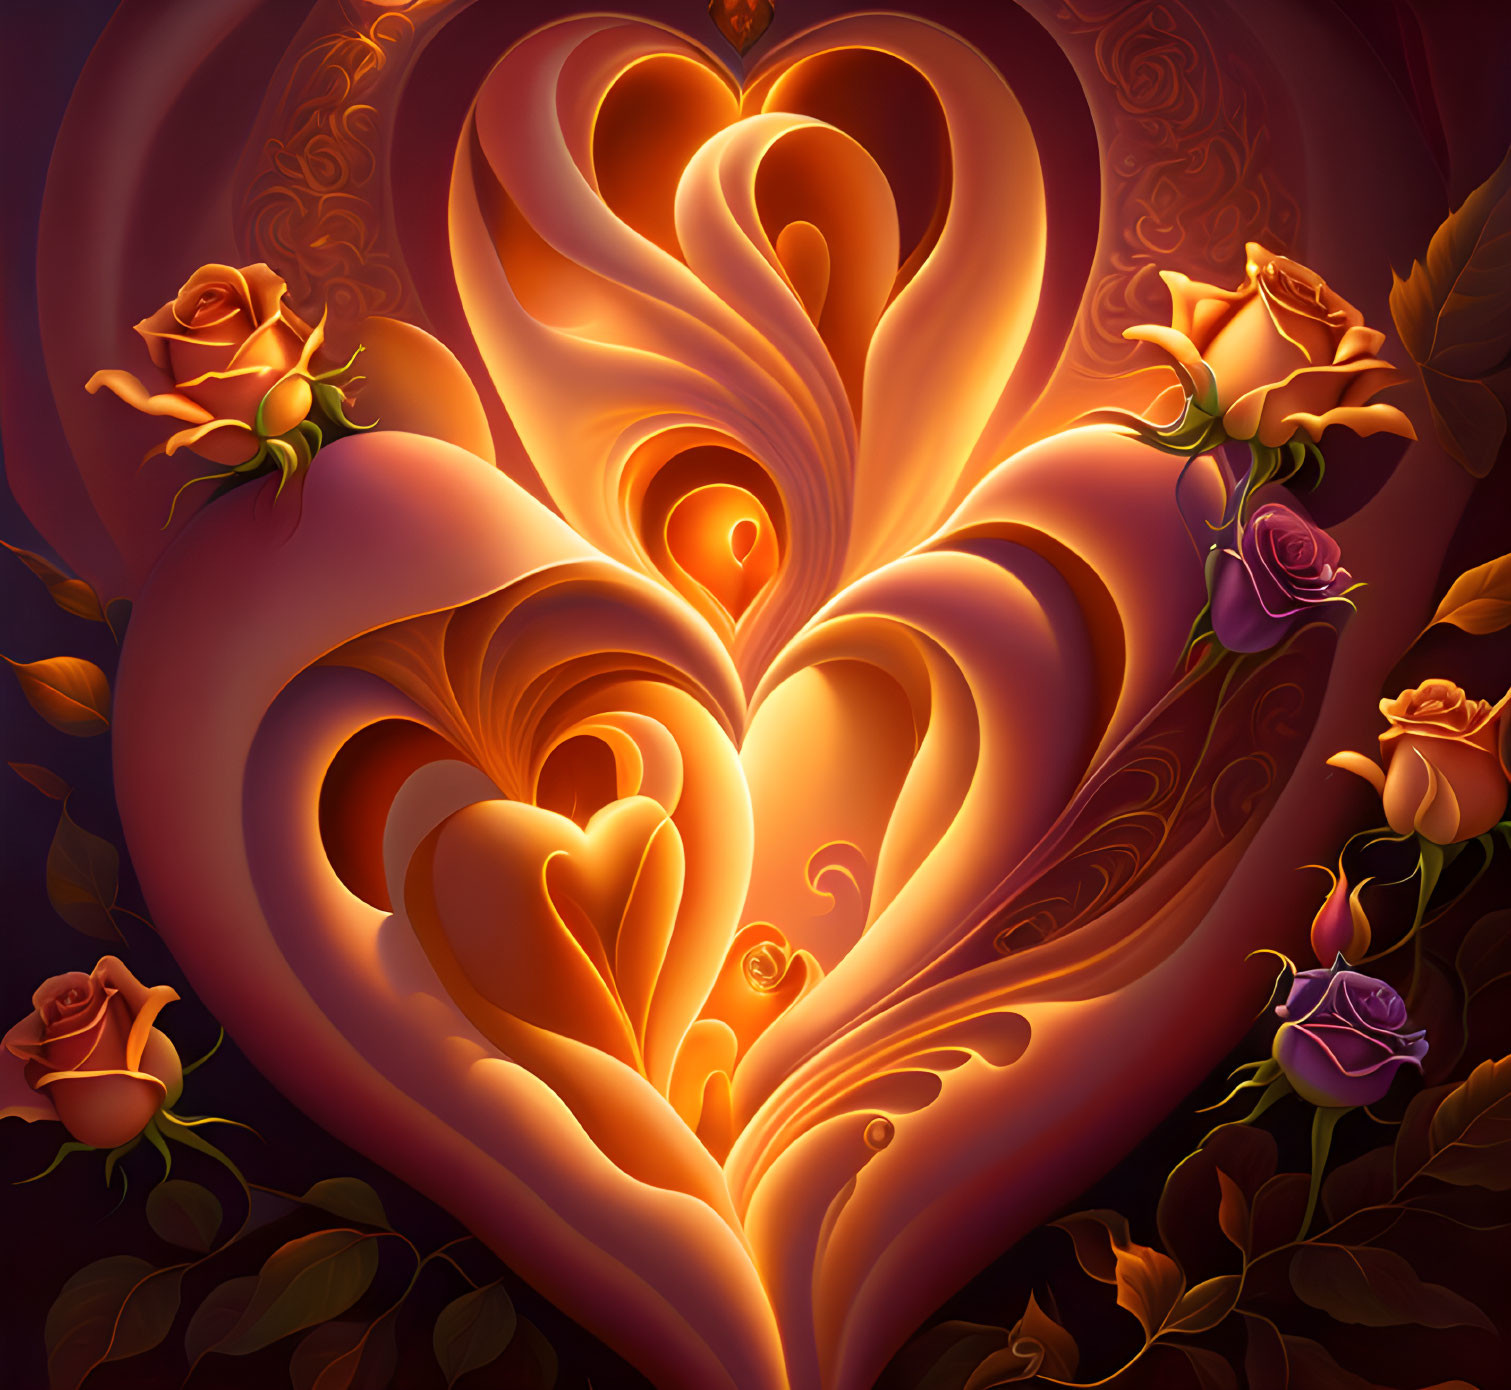 Glowing ornate heart with roses and smaller hearts on dark background